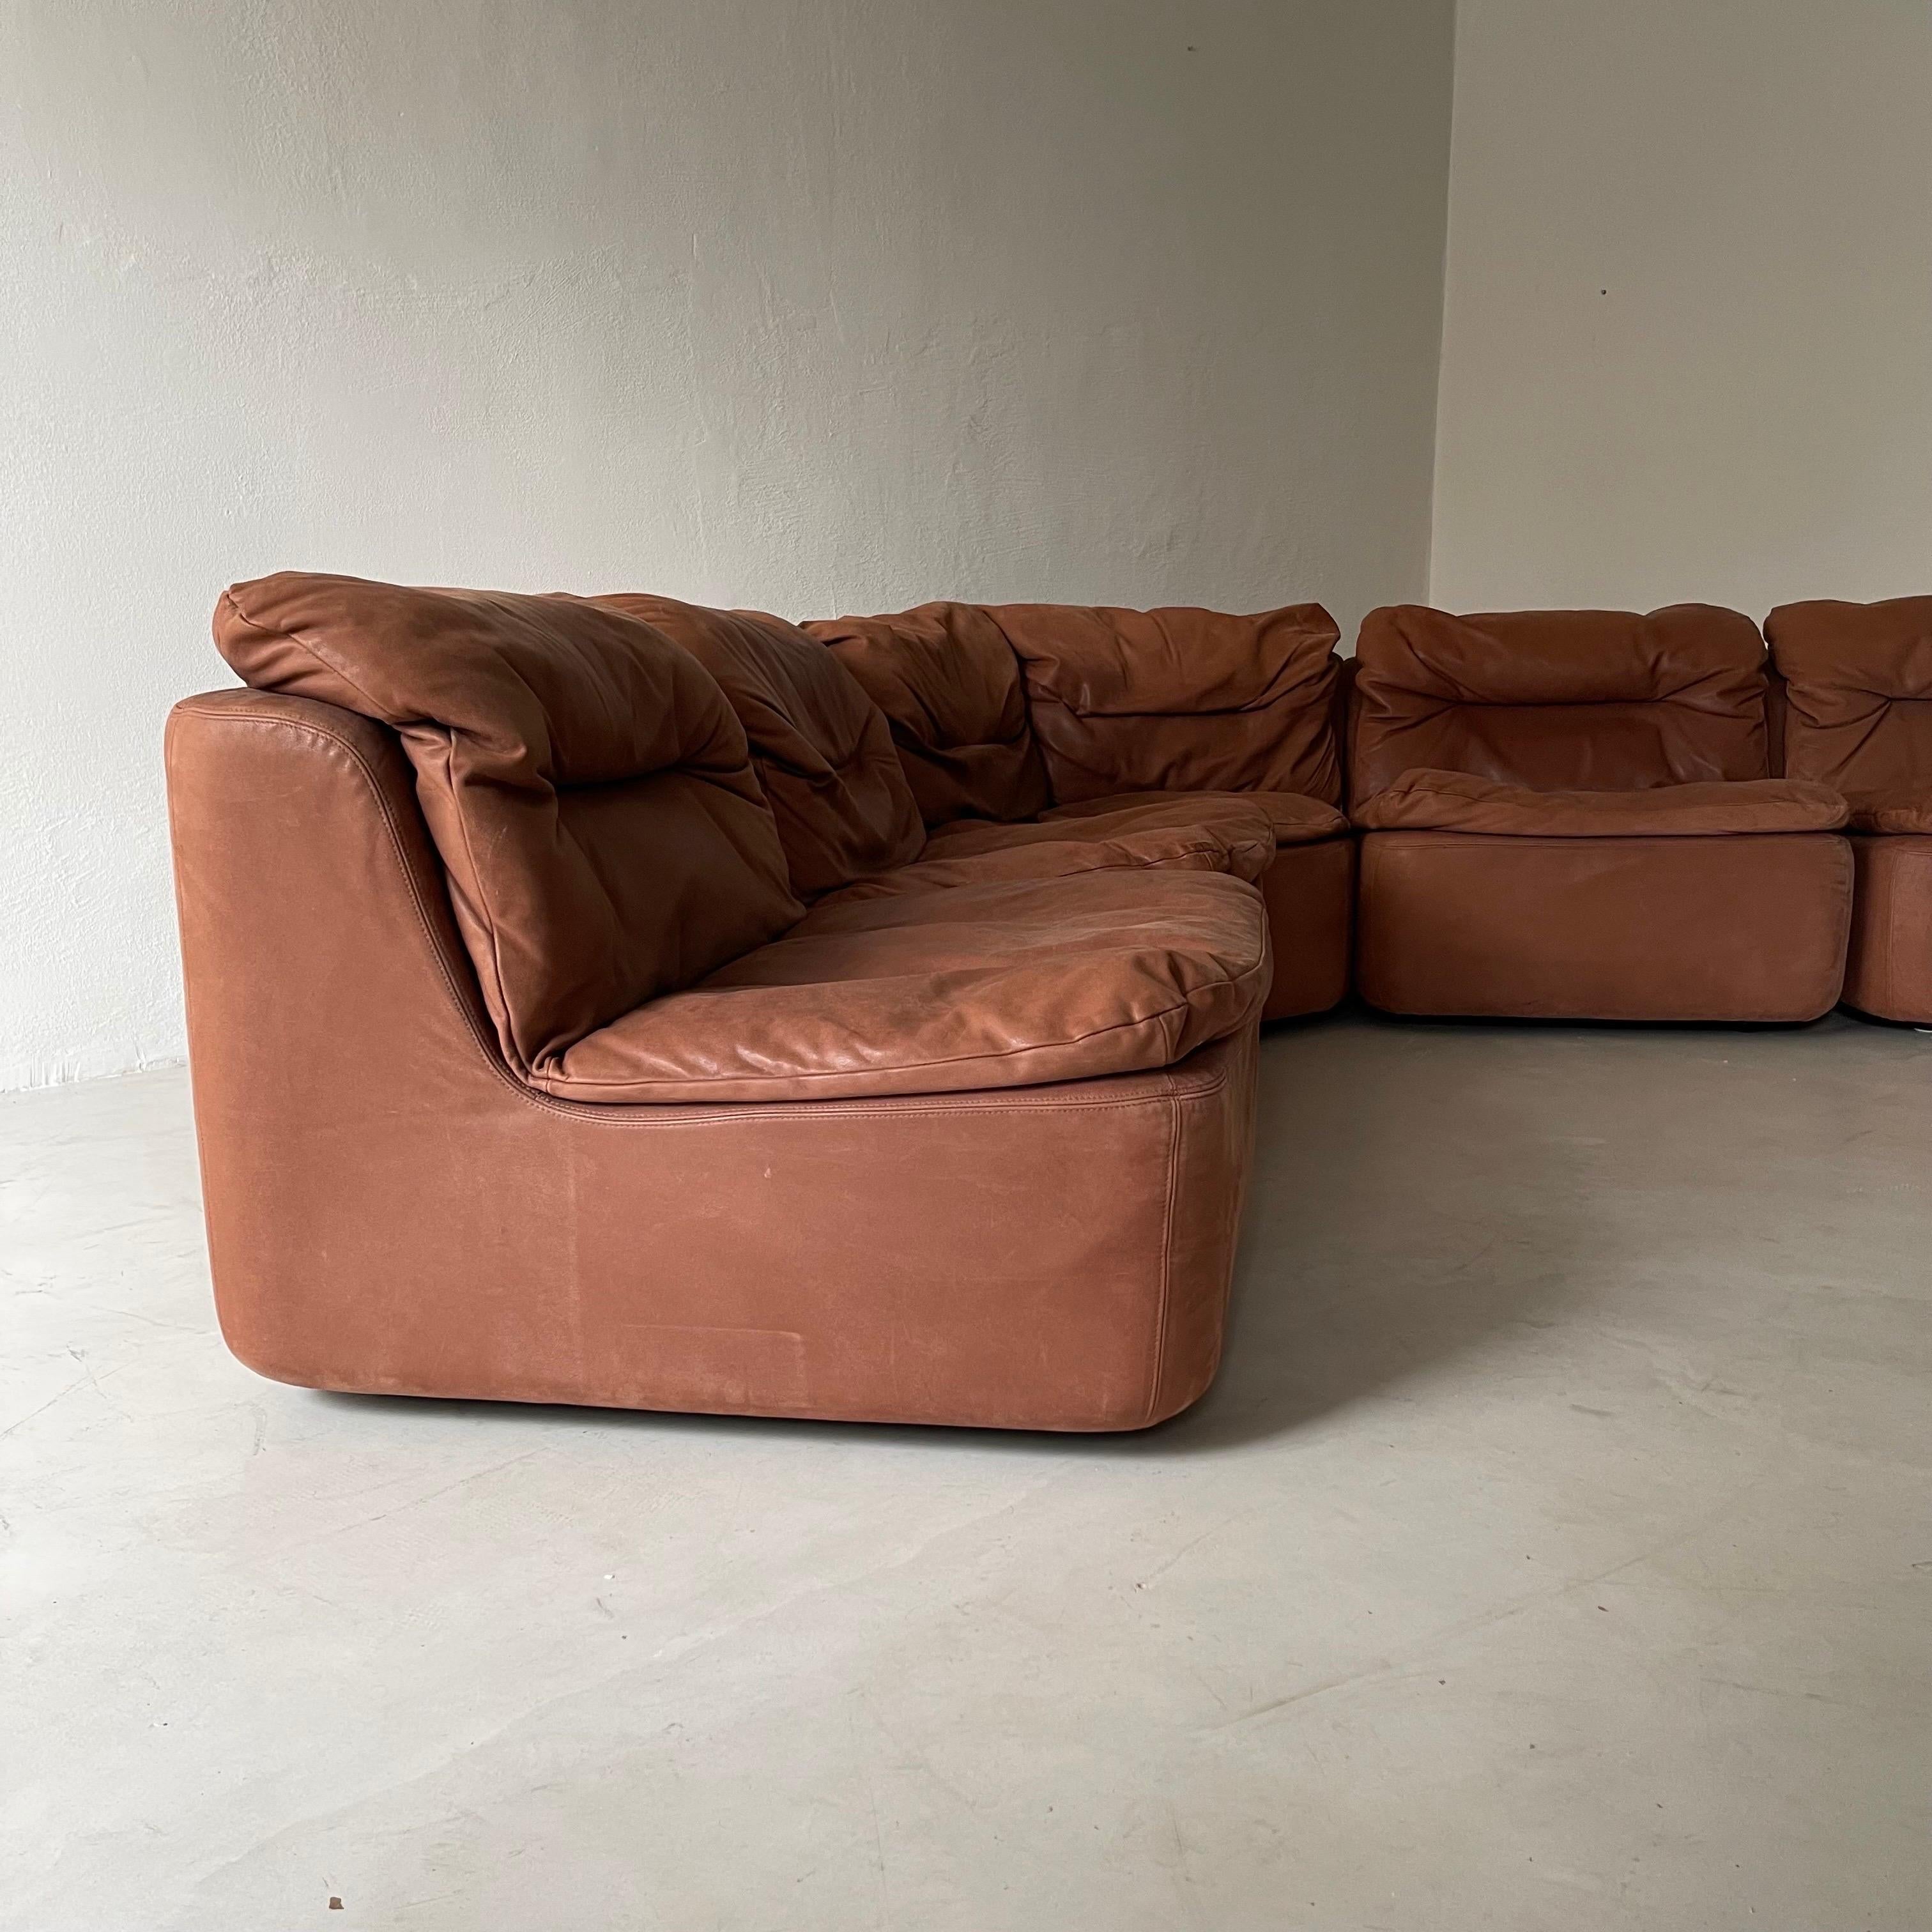 Leather Vintage Modular Sofa by Friedrich Hill for Walter Knoll 1970s For Sale